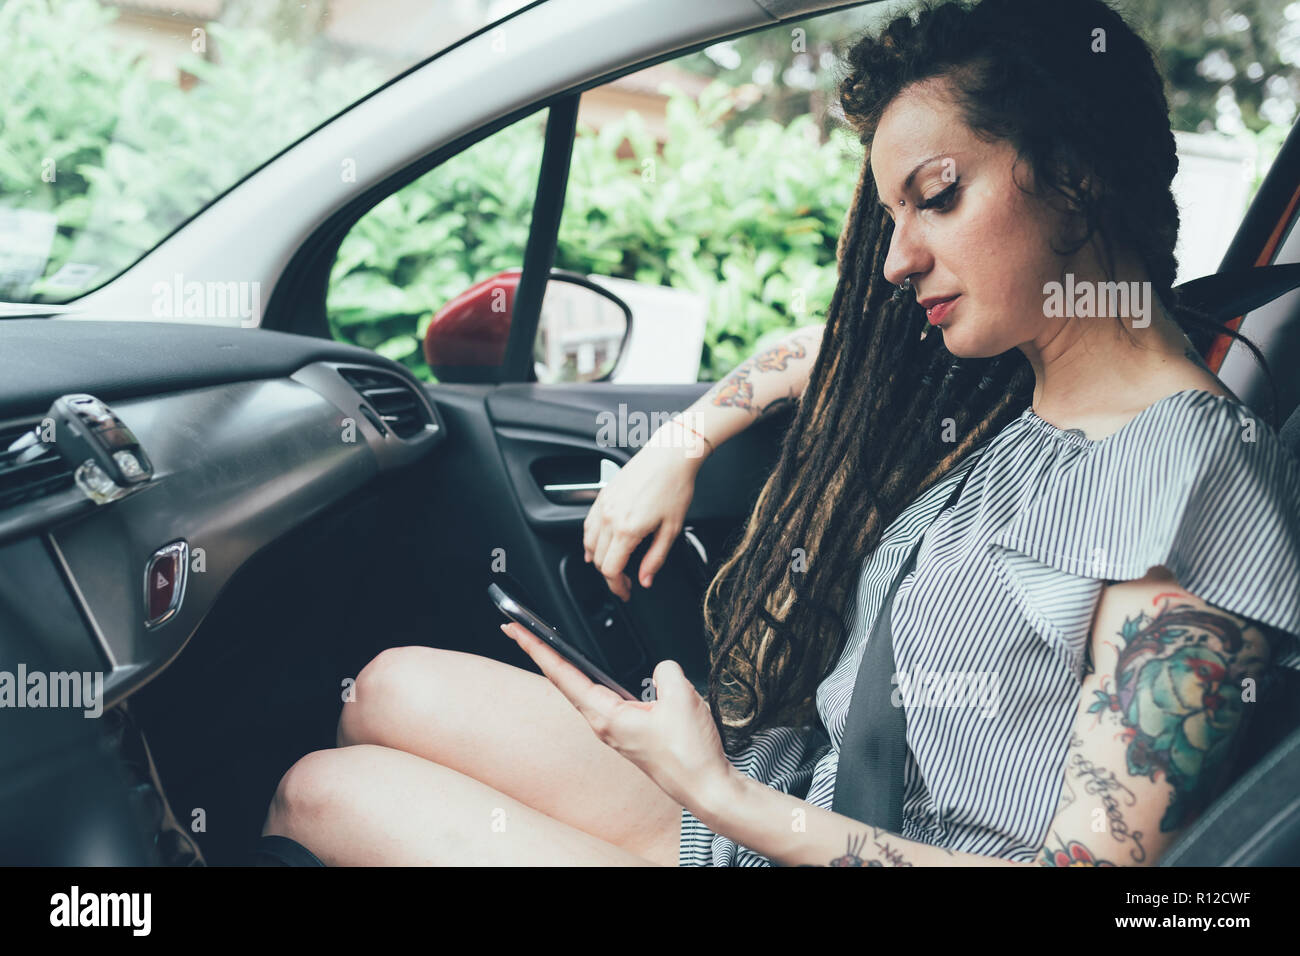 Woman using mobile phone in car Stock Photo